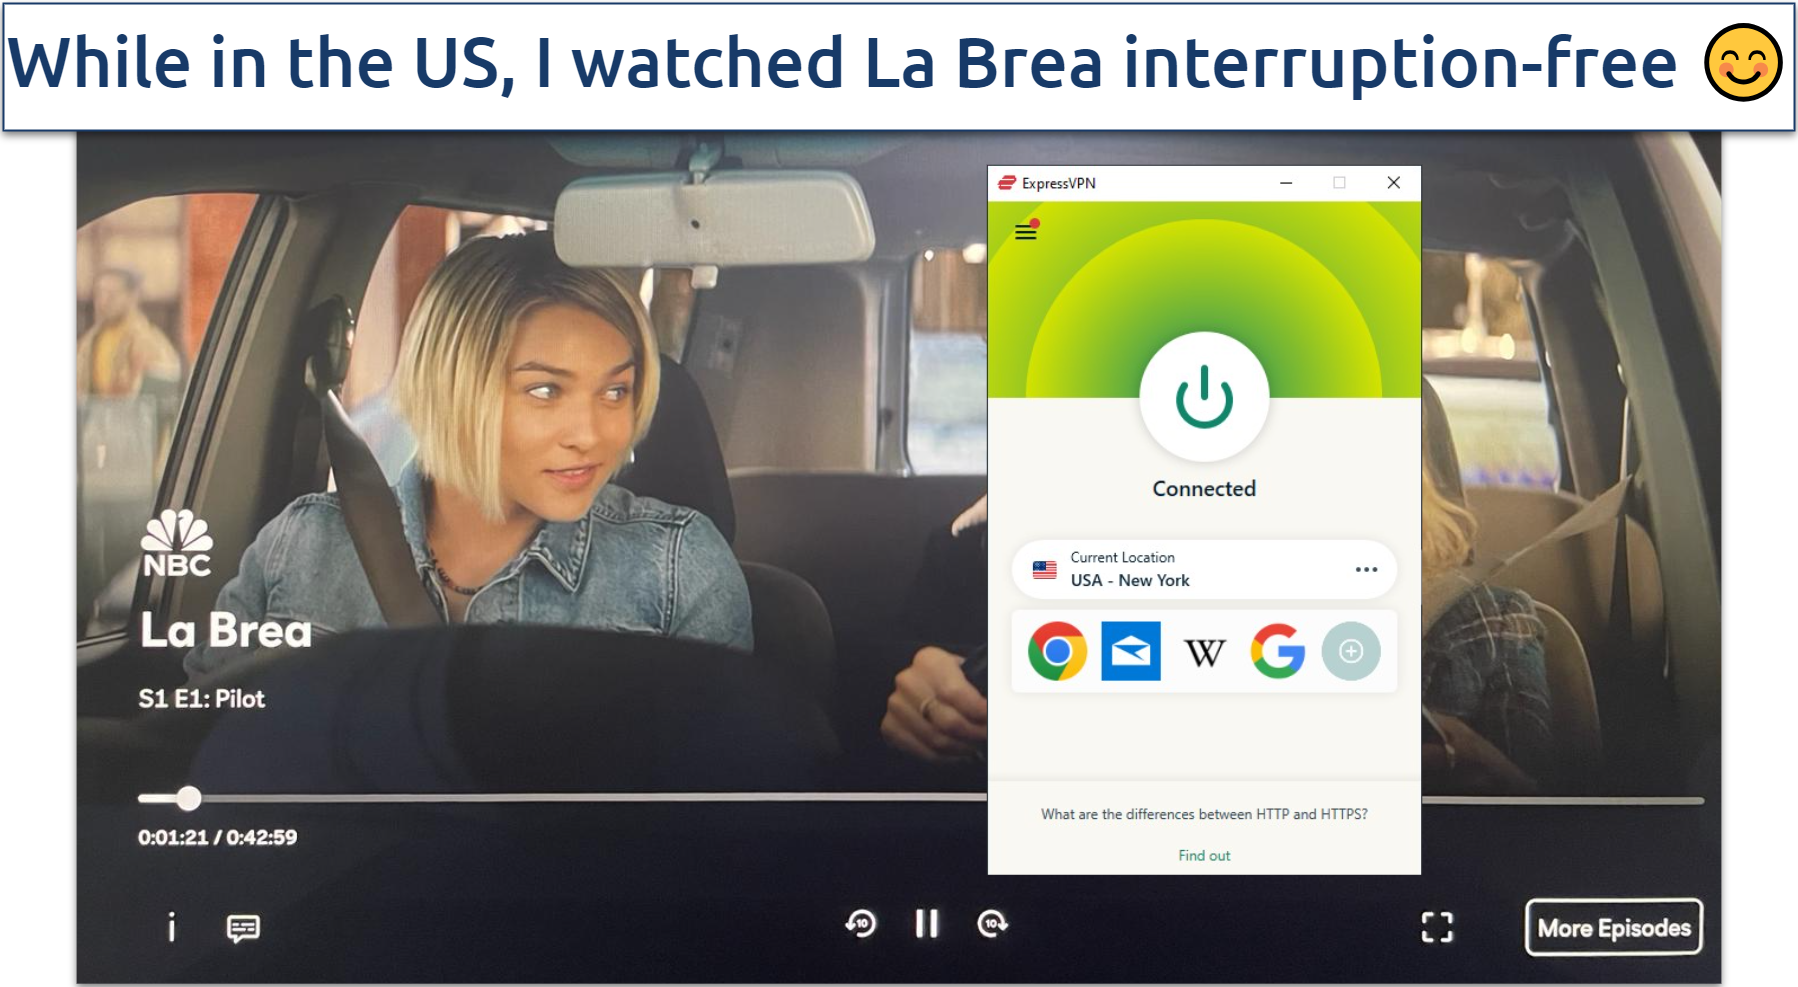 Screenshot of La Brea streaming on Peacock TV with ExpressVPN connected